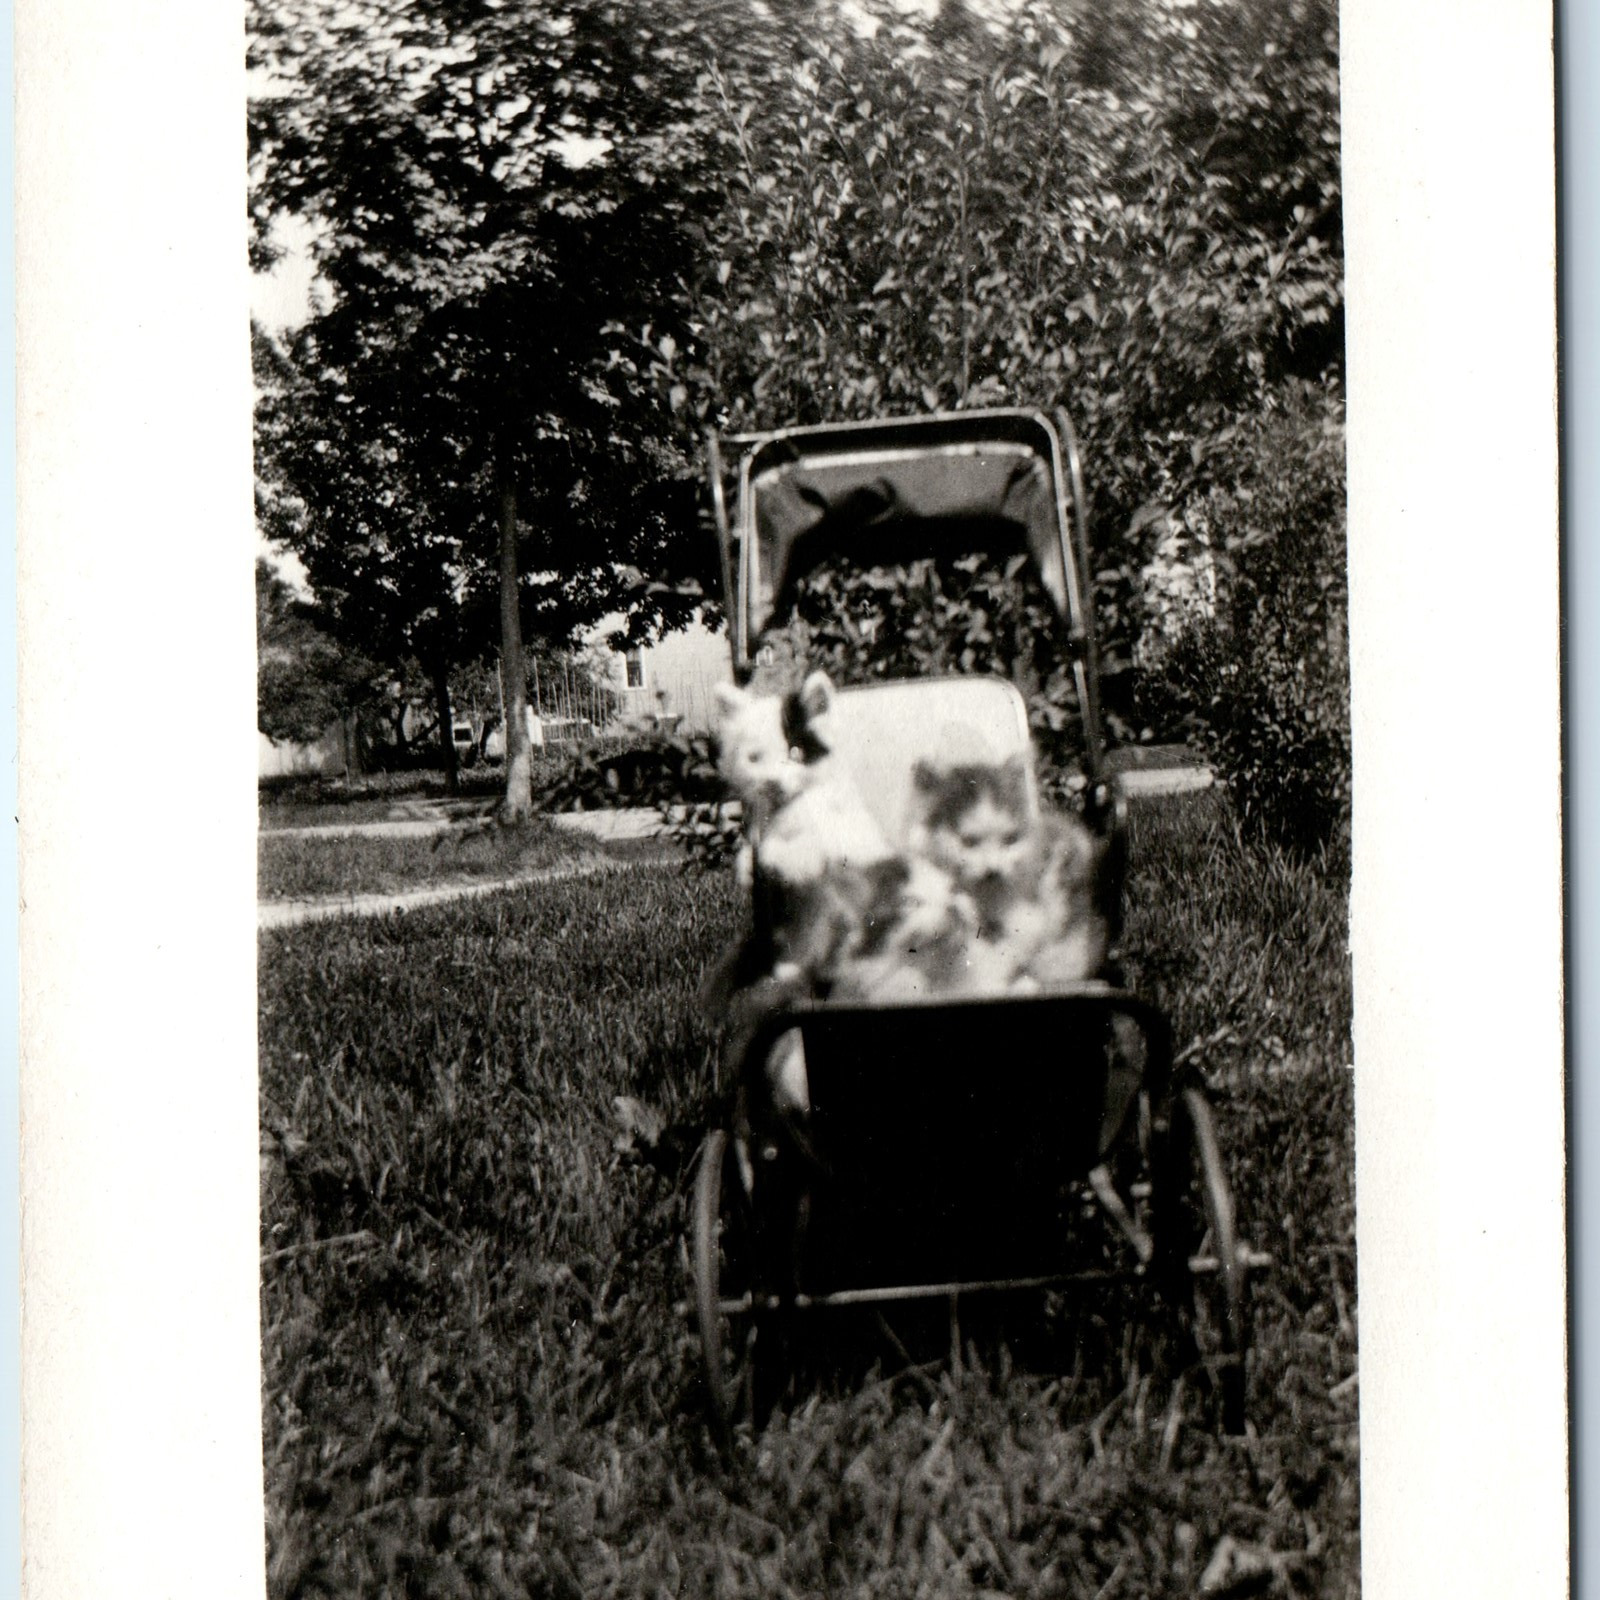 c1910s Adorable Kittens Stroller RPPC Cute Cats Animal Real Photo Outdoors A259